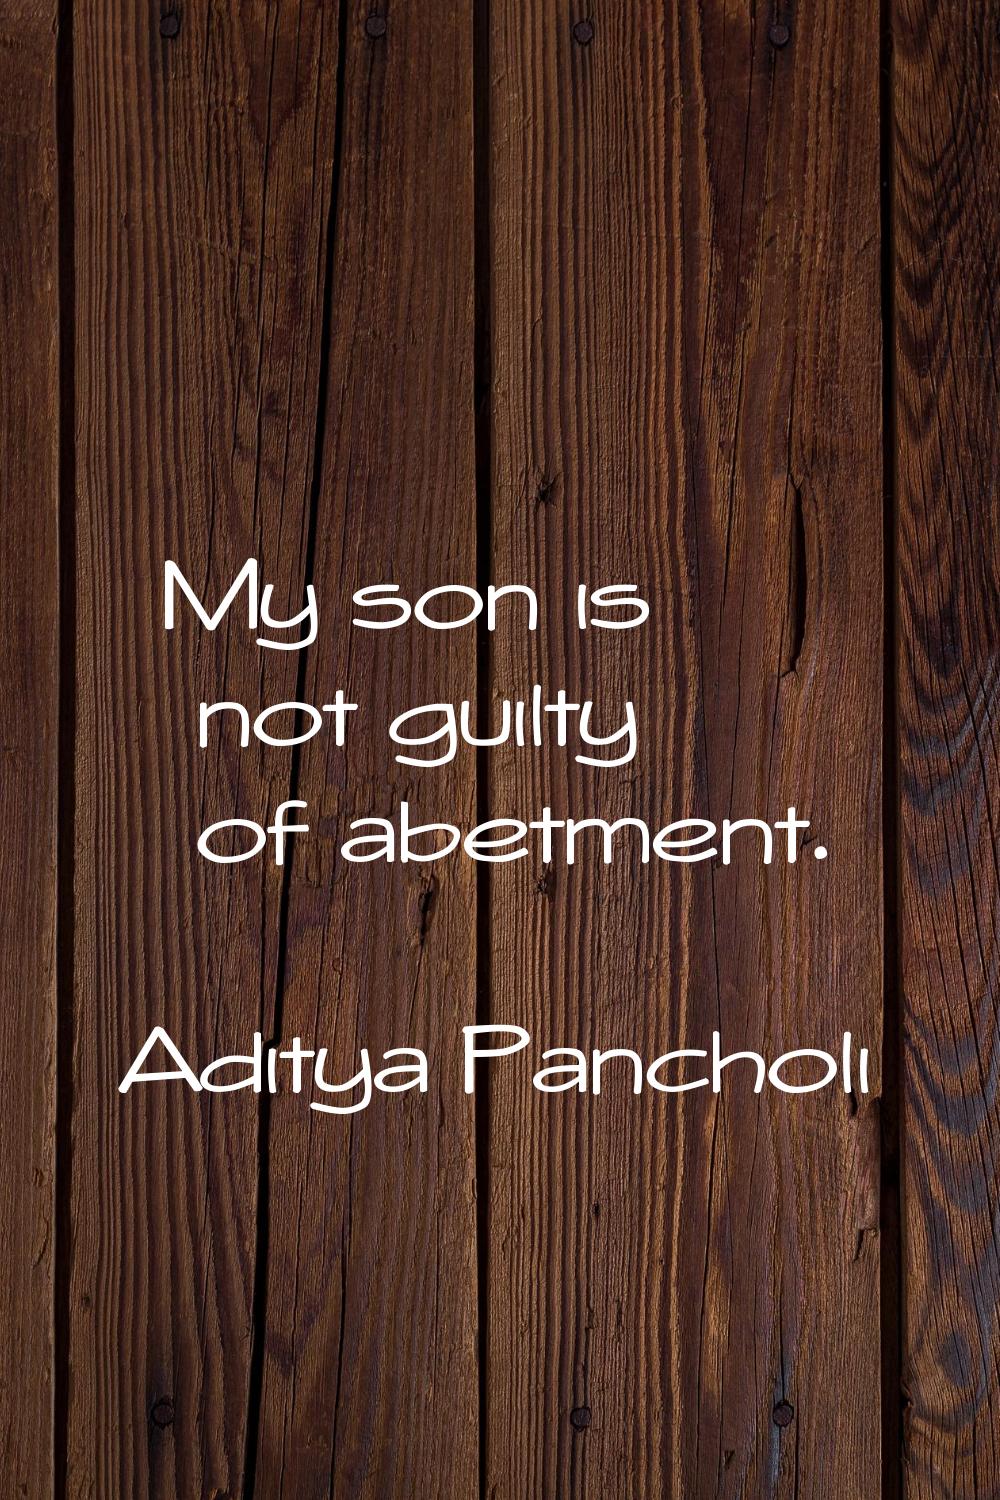 My son is not guilty of abetment.